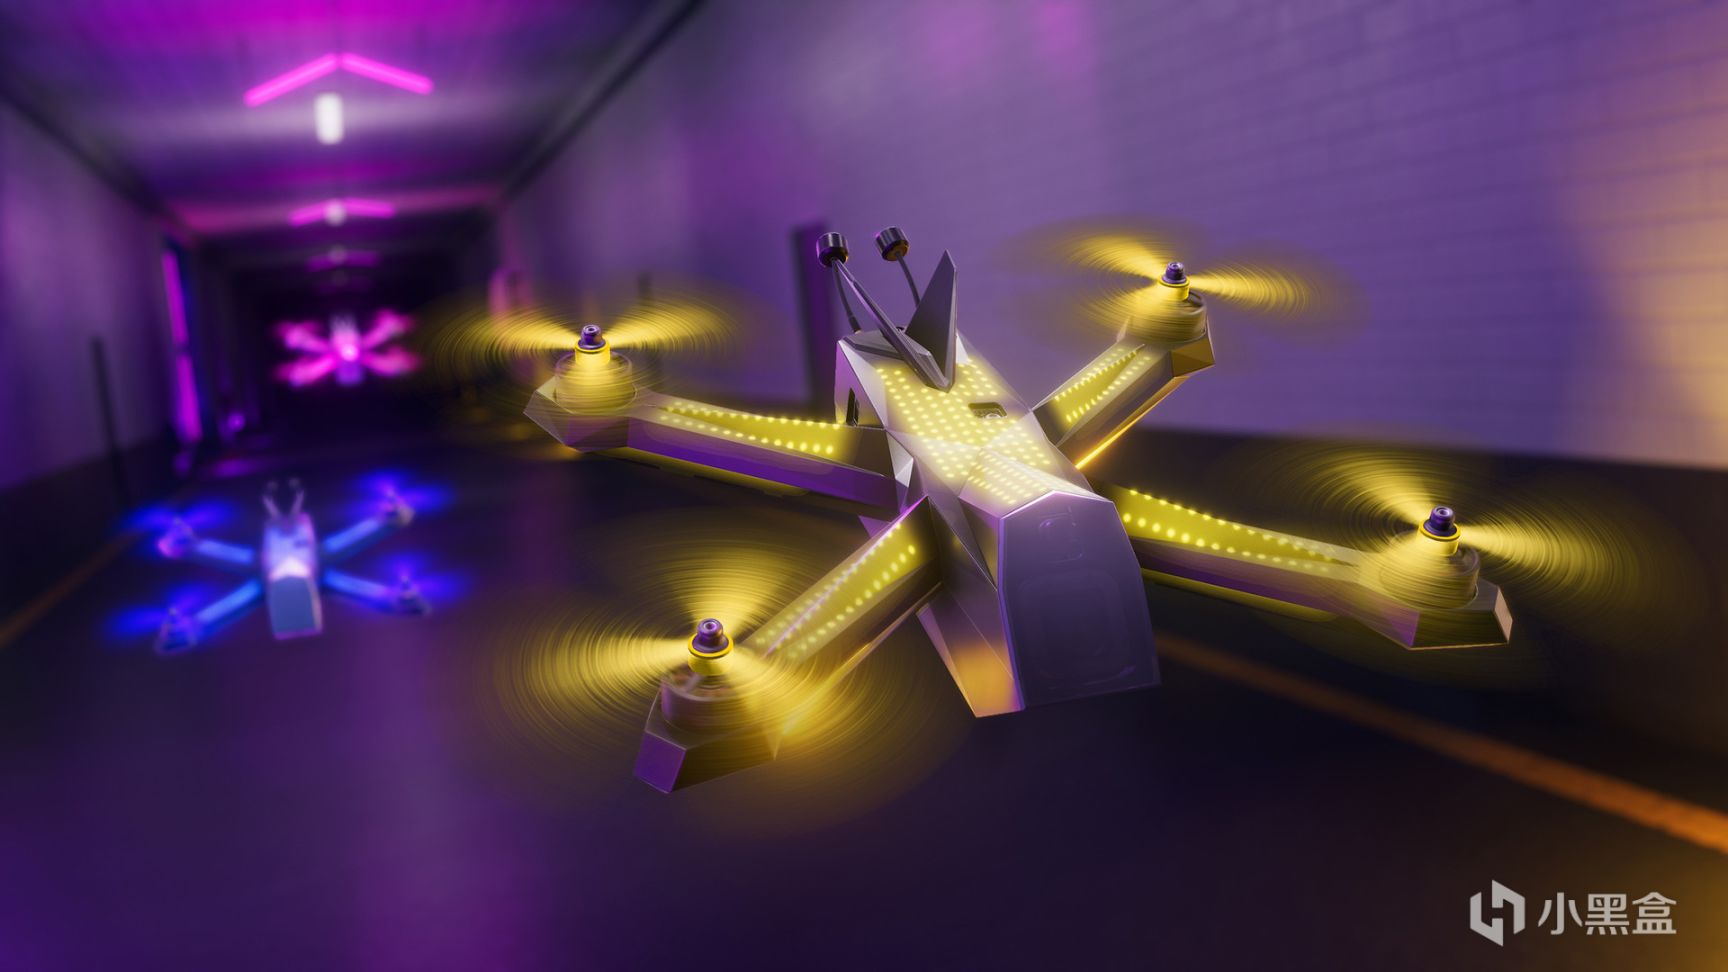 Epic限时免费领取《Runbow》《The Drone Racing League Simulator》 5%title%